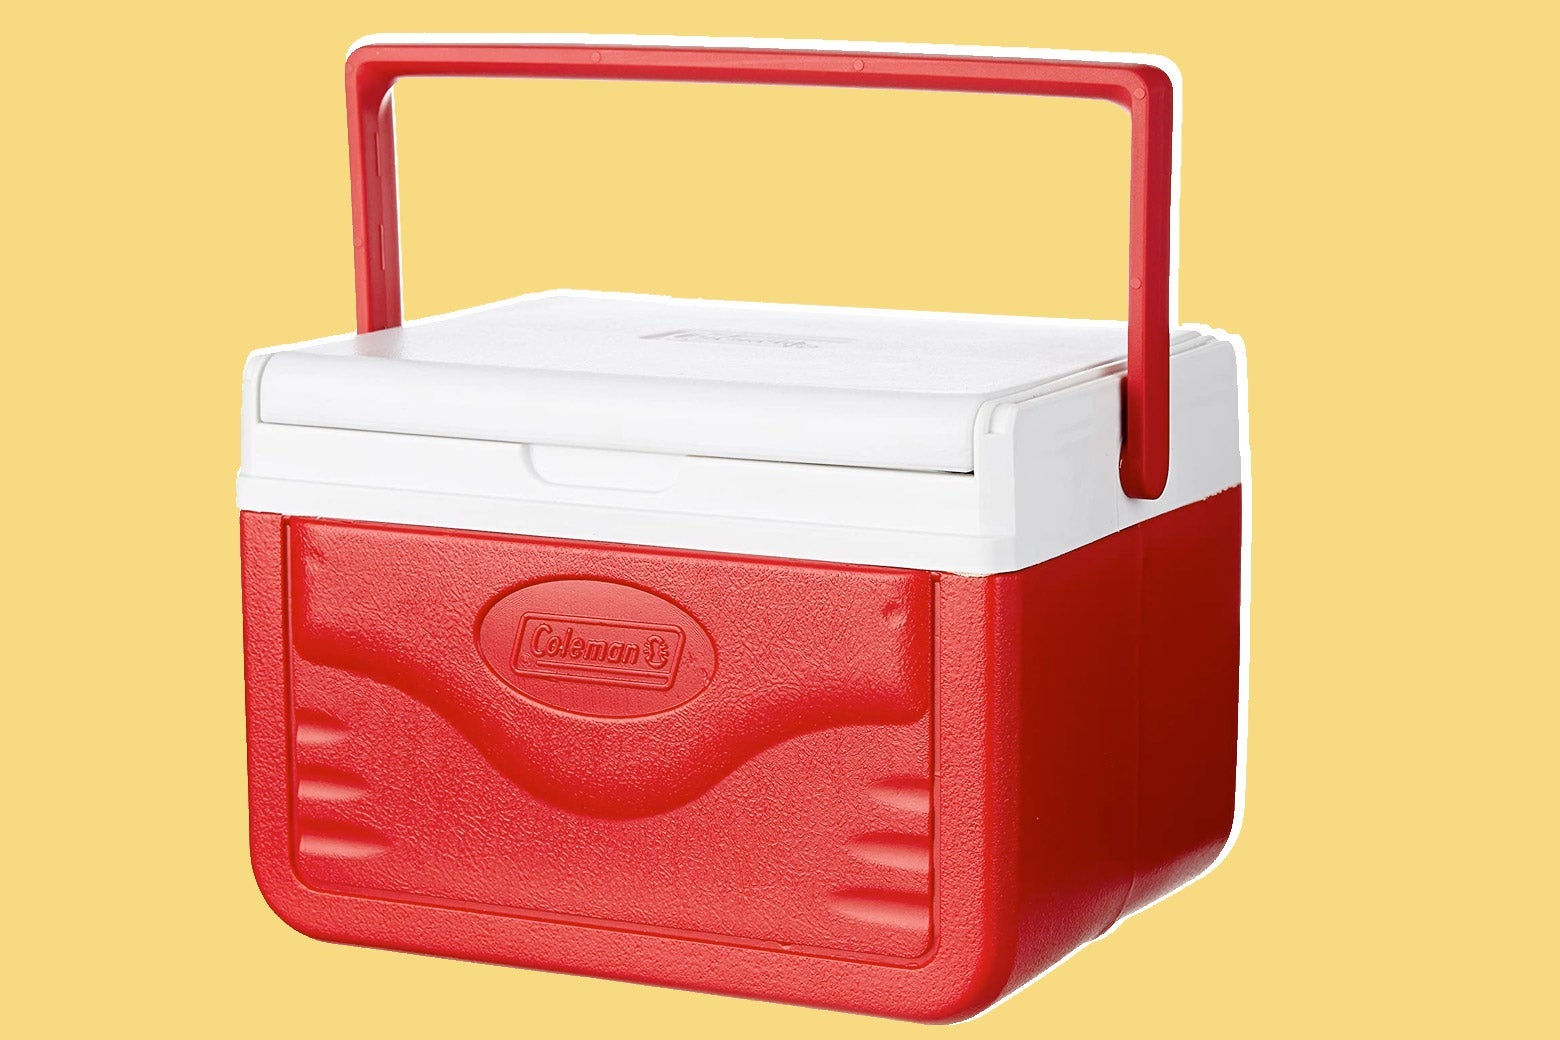 Coleman's small, red, hand-held cooler